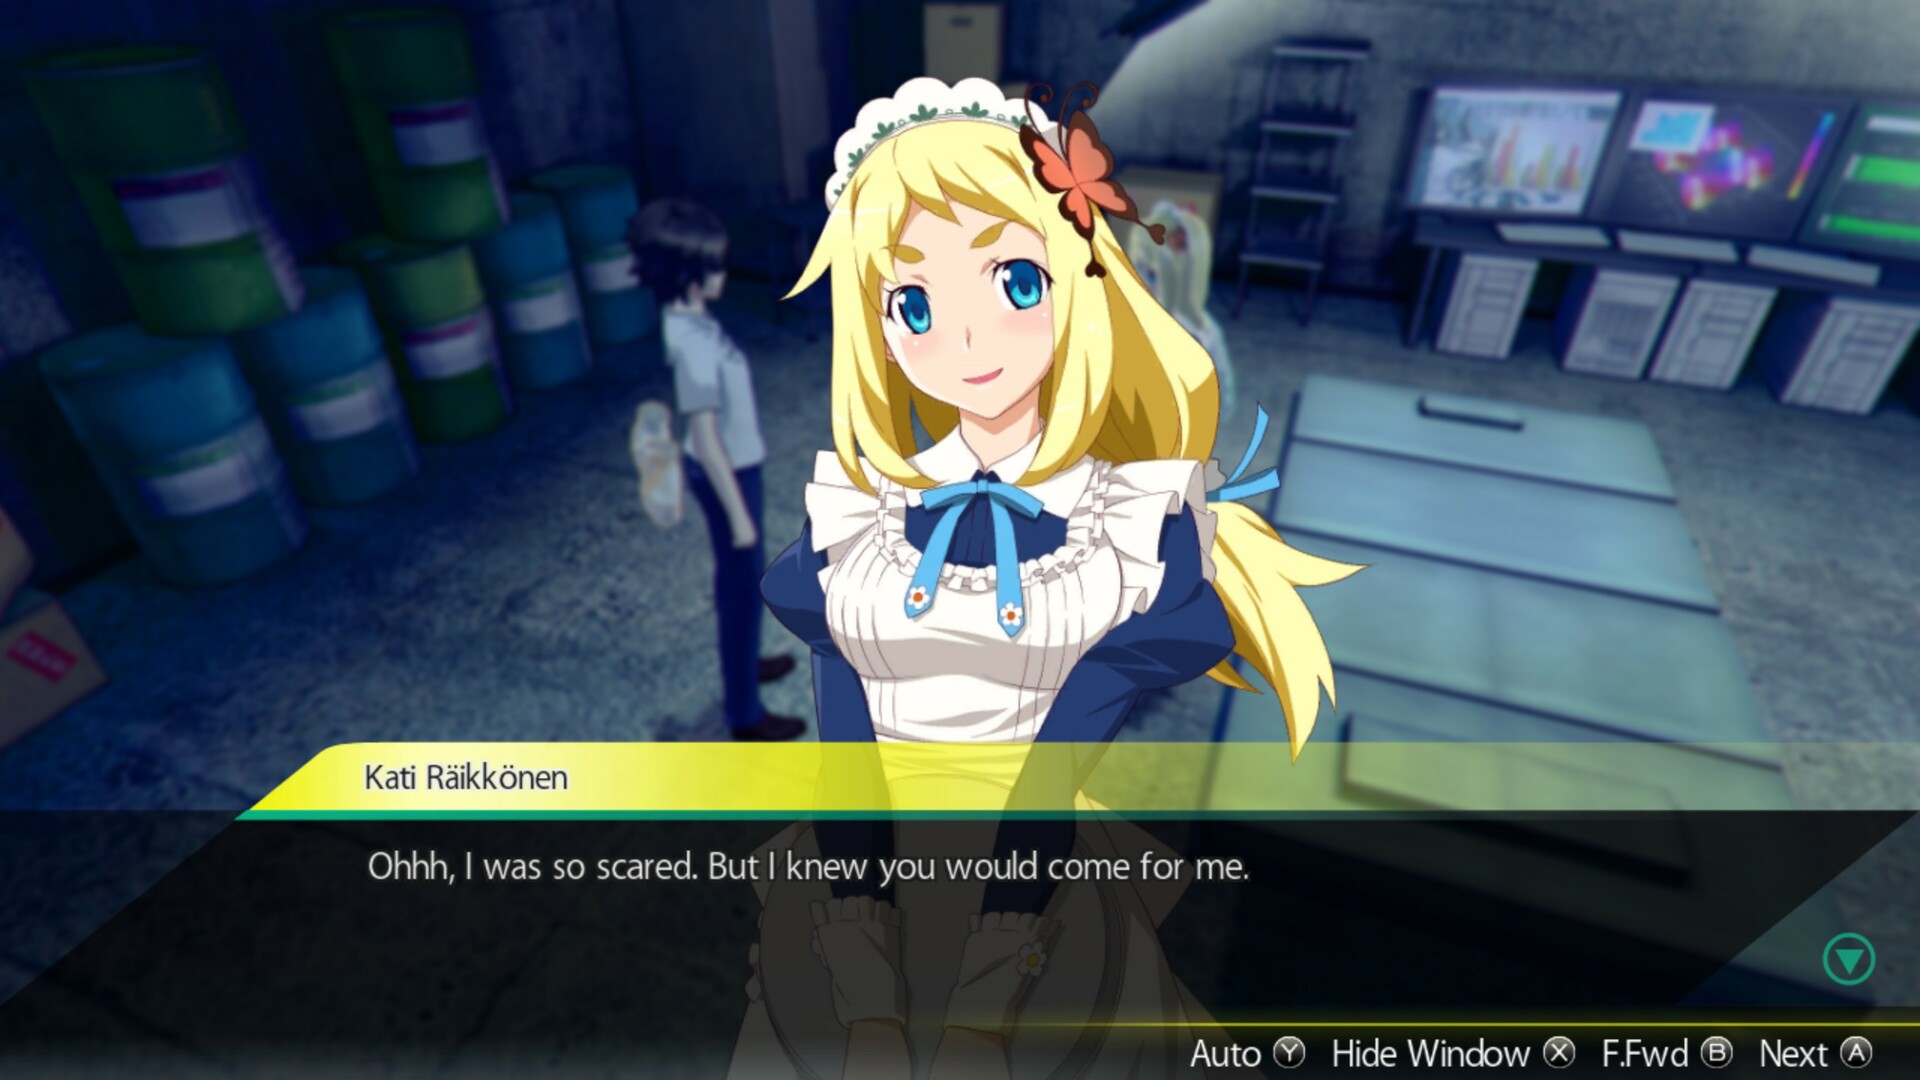 AKIBA'S TRIP: Undead & Undressed - Kati's Route DLC Upgrade + Complete Outfit Set Featured Screenshot #1